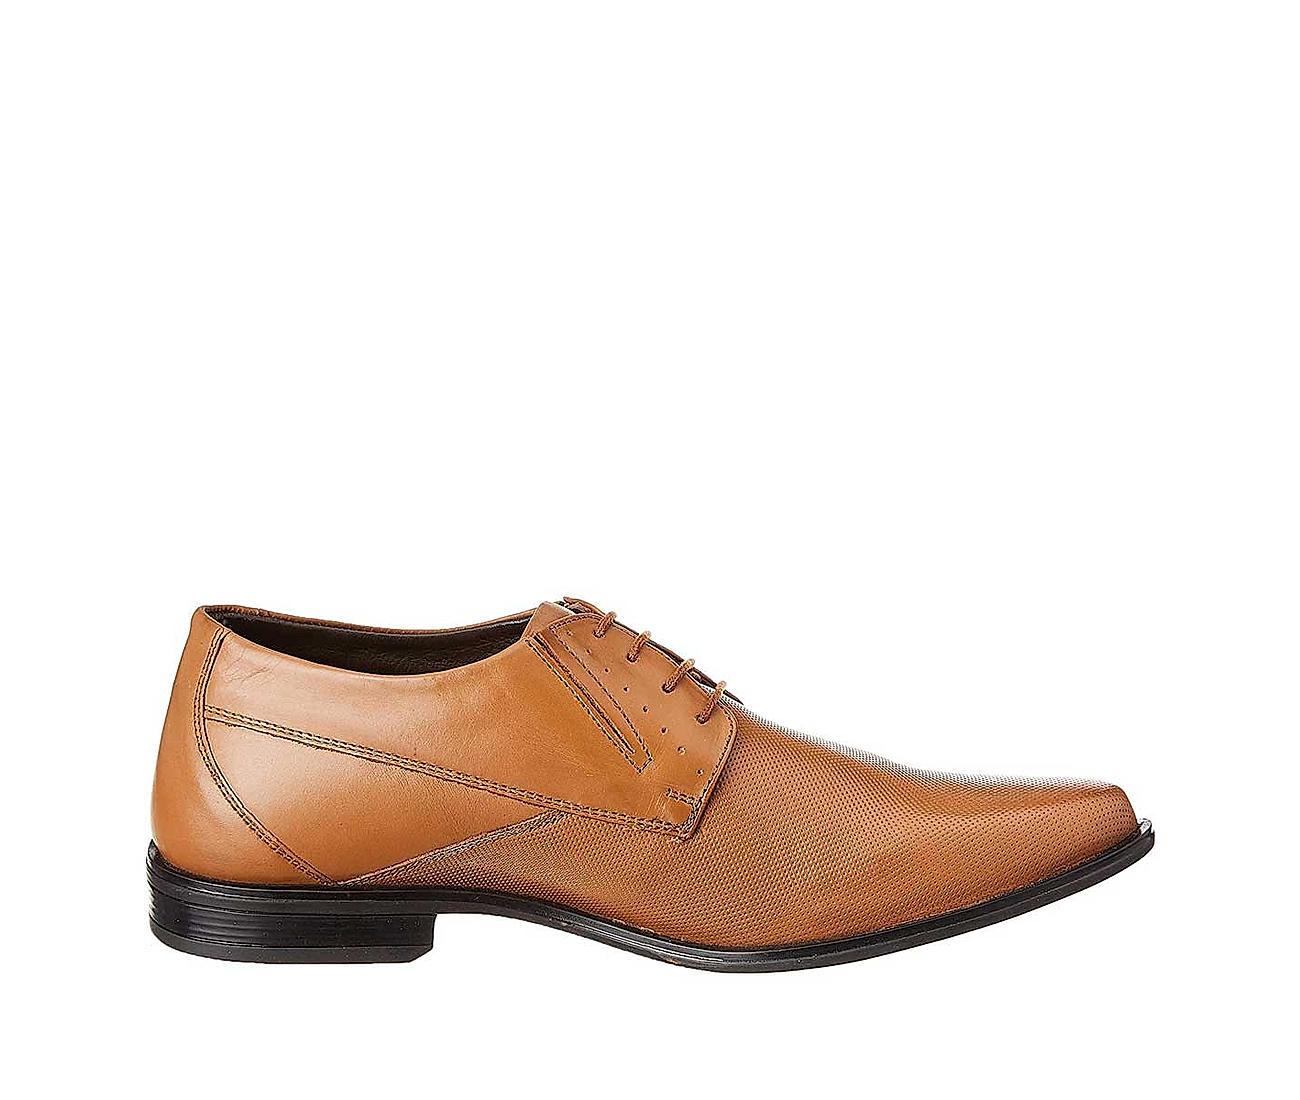 Buy Lee Cooper Tan Mens Leather Formal Shoes Online at Regal Shoes |8325509